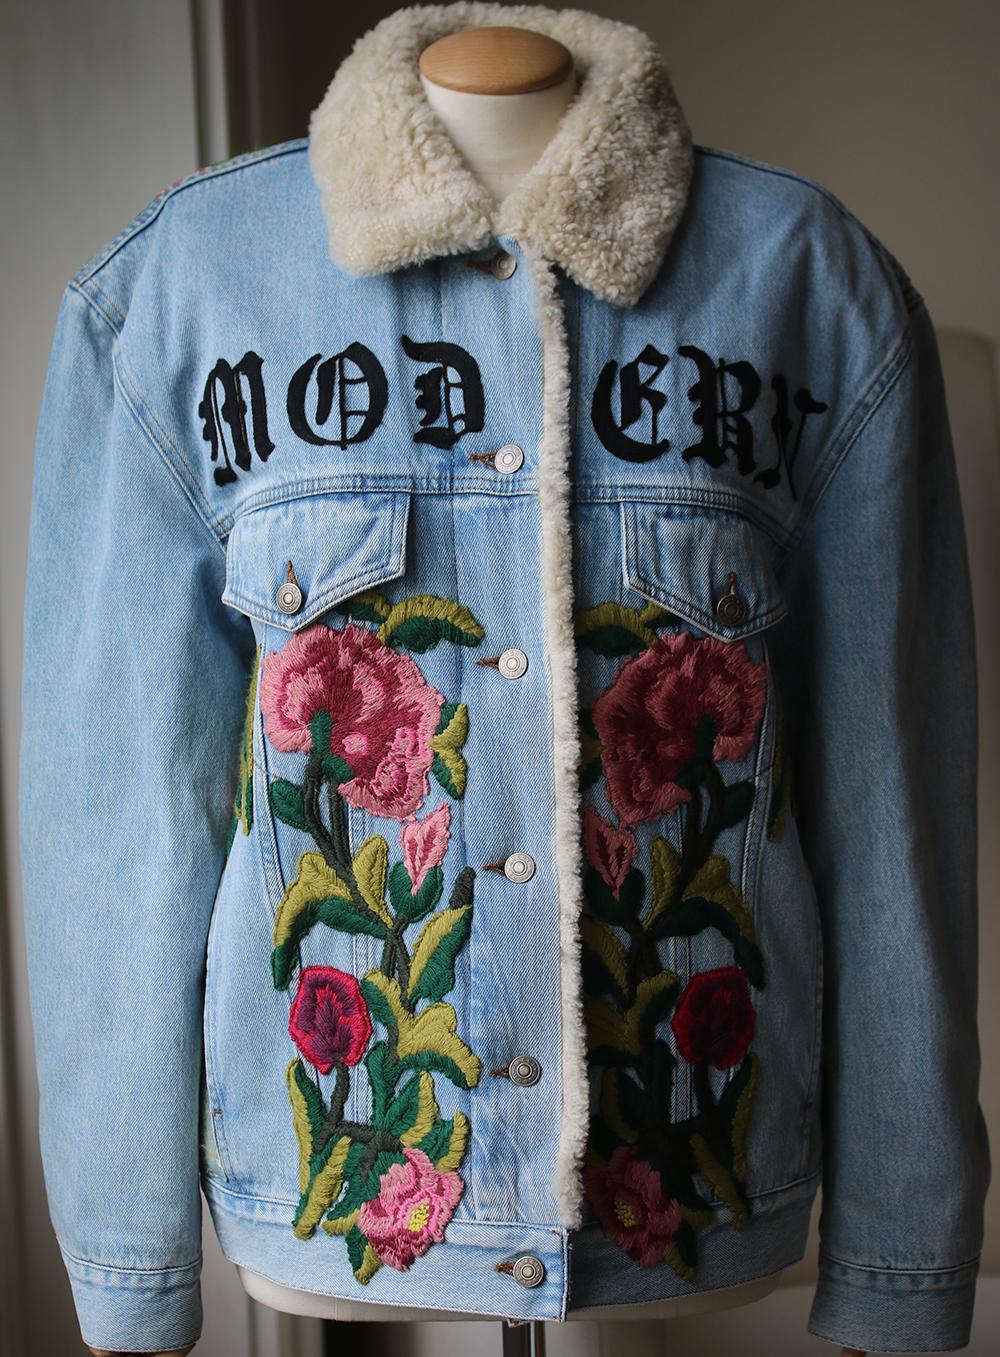 Gucci's oversized shearling-lined denim jacket has a cool, customized look. The jacquard panel at the back is intricately embroidered by hand with florals and a flaming mythical creature - each piece takes an artisan hours to complete. The gothic